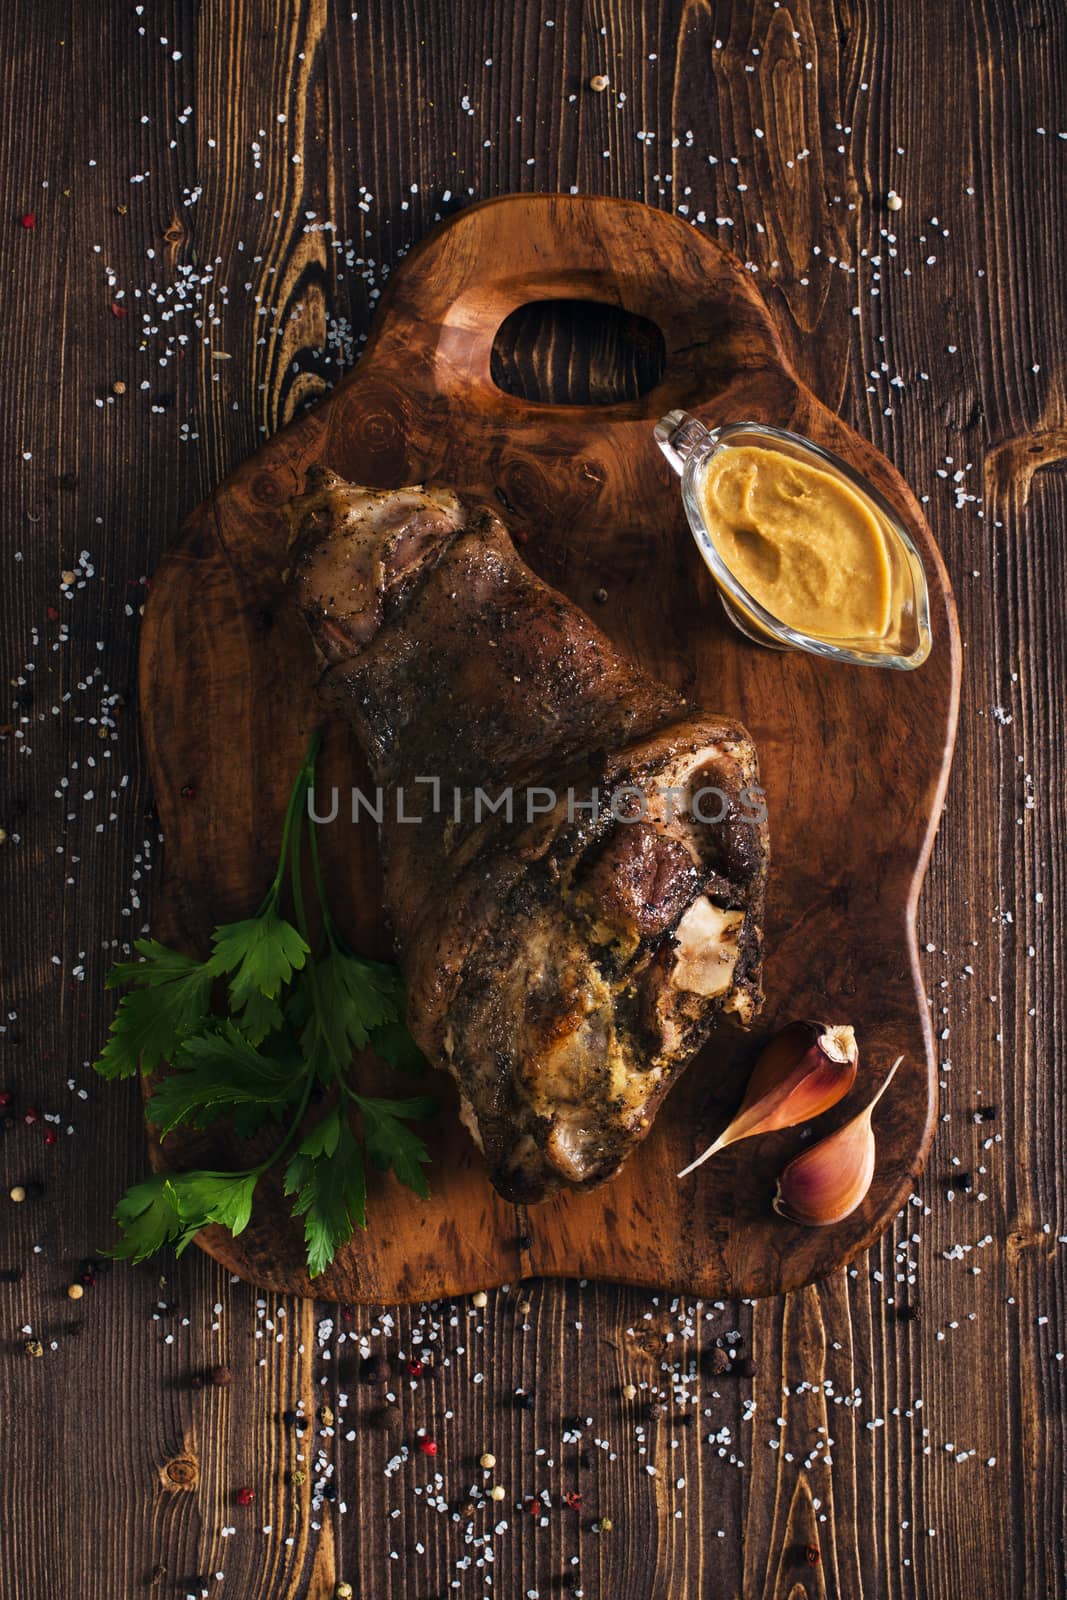 Whole roasted pork knuckle with mustard by kzen